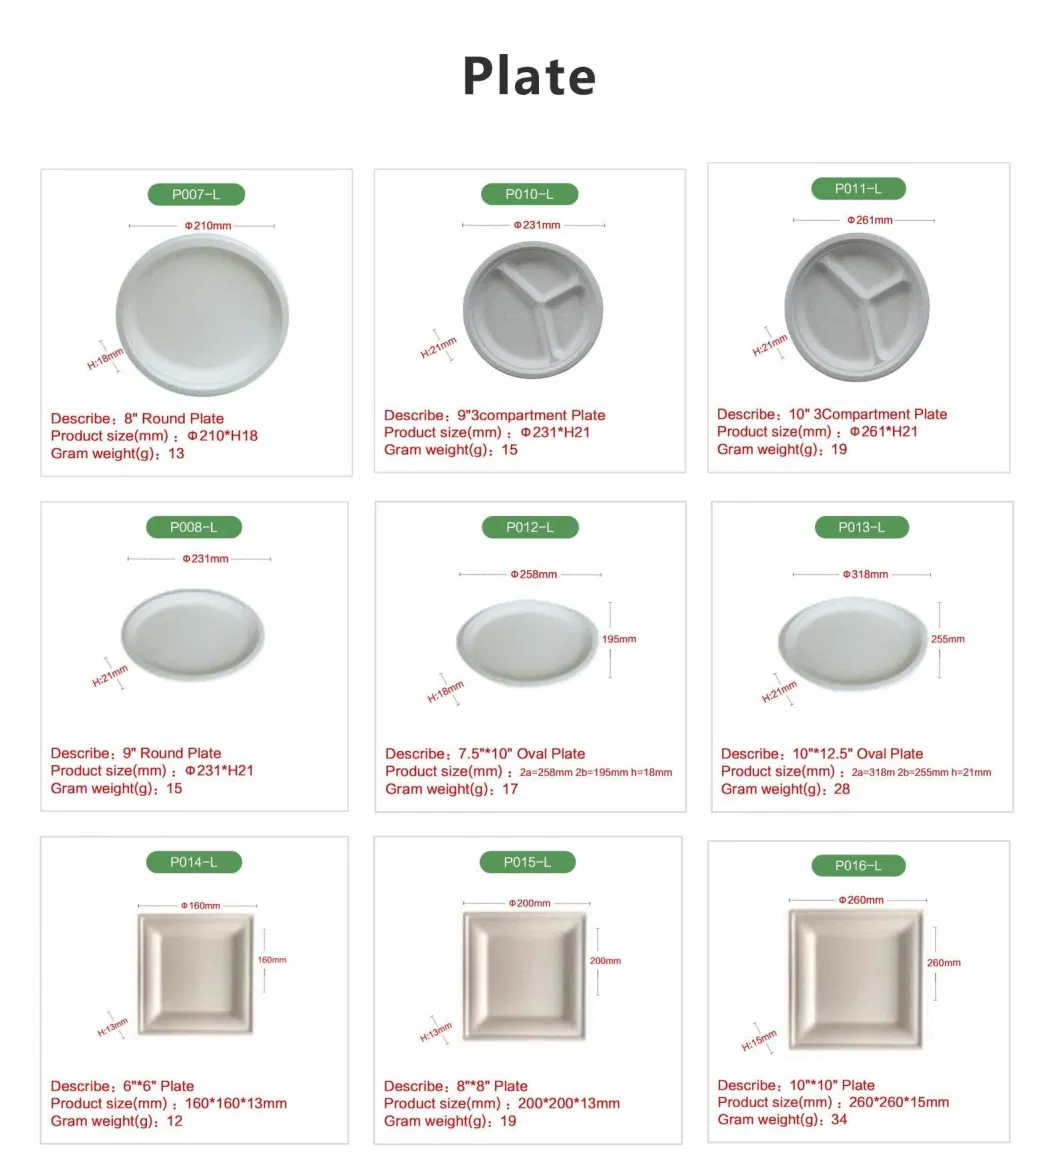 Packaging Eco Friendly Biodegardable Sugarcane Pulp Tableware Disposable Dishes Dining Plates Sets Dinnerware